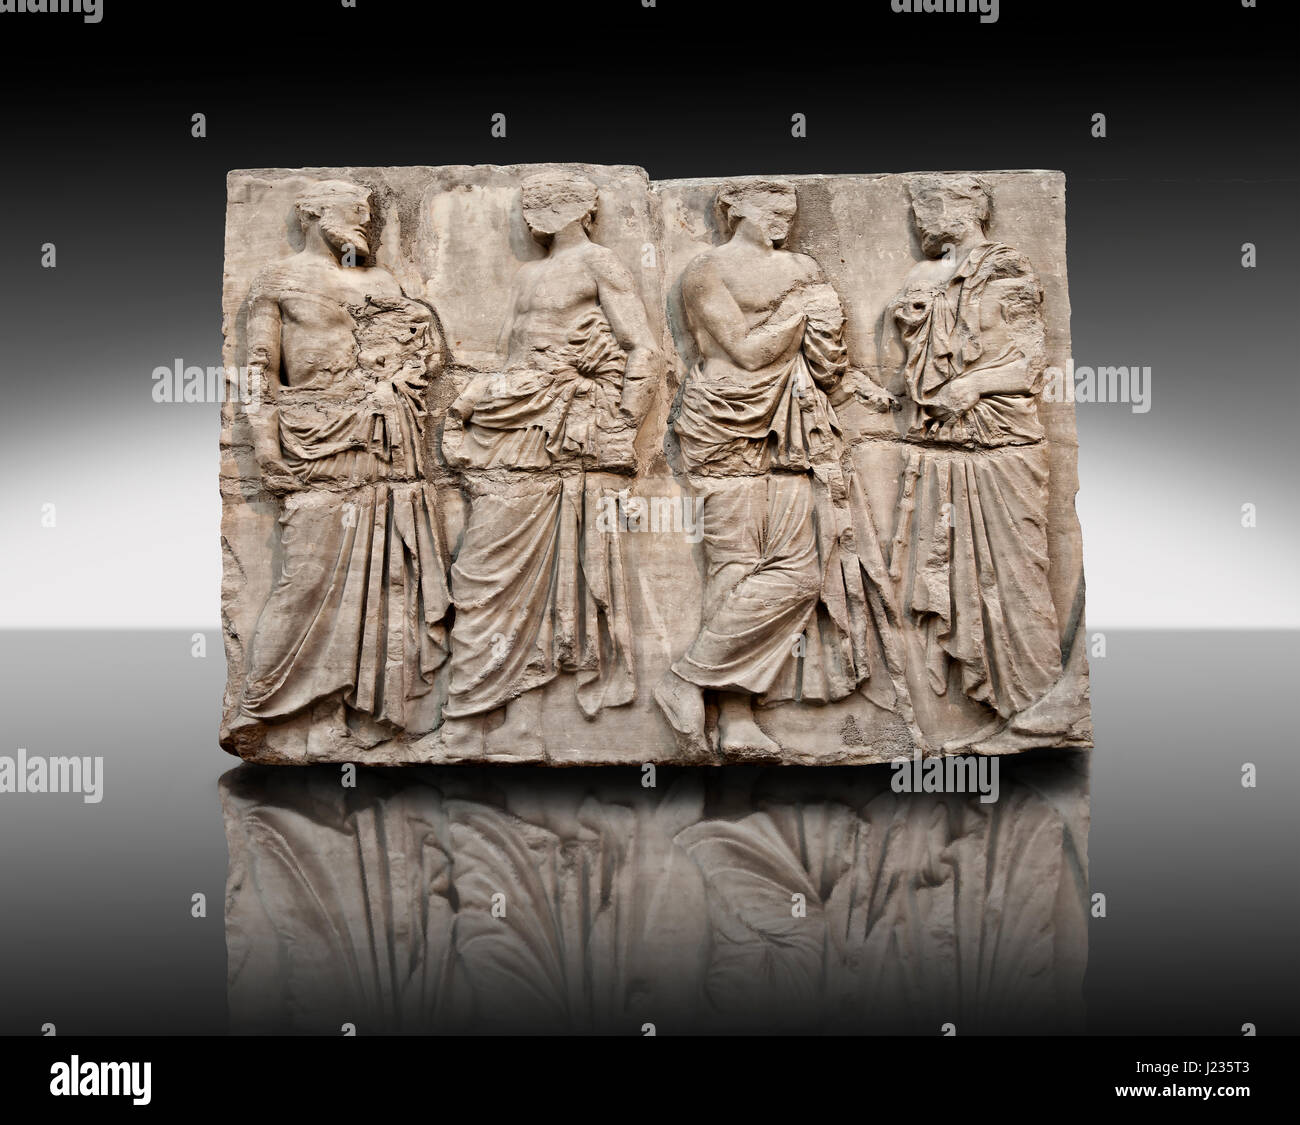 Marble Releif Sculptures from the Parthenon of the Acropolis Athens.  British Museum, London Stock Photo